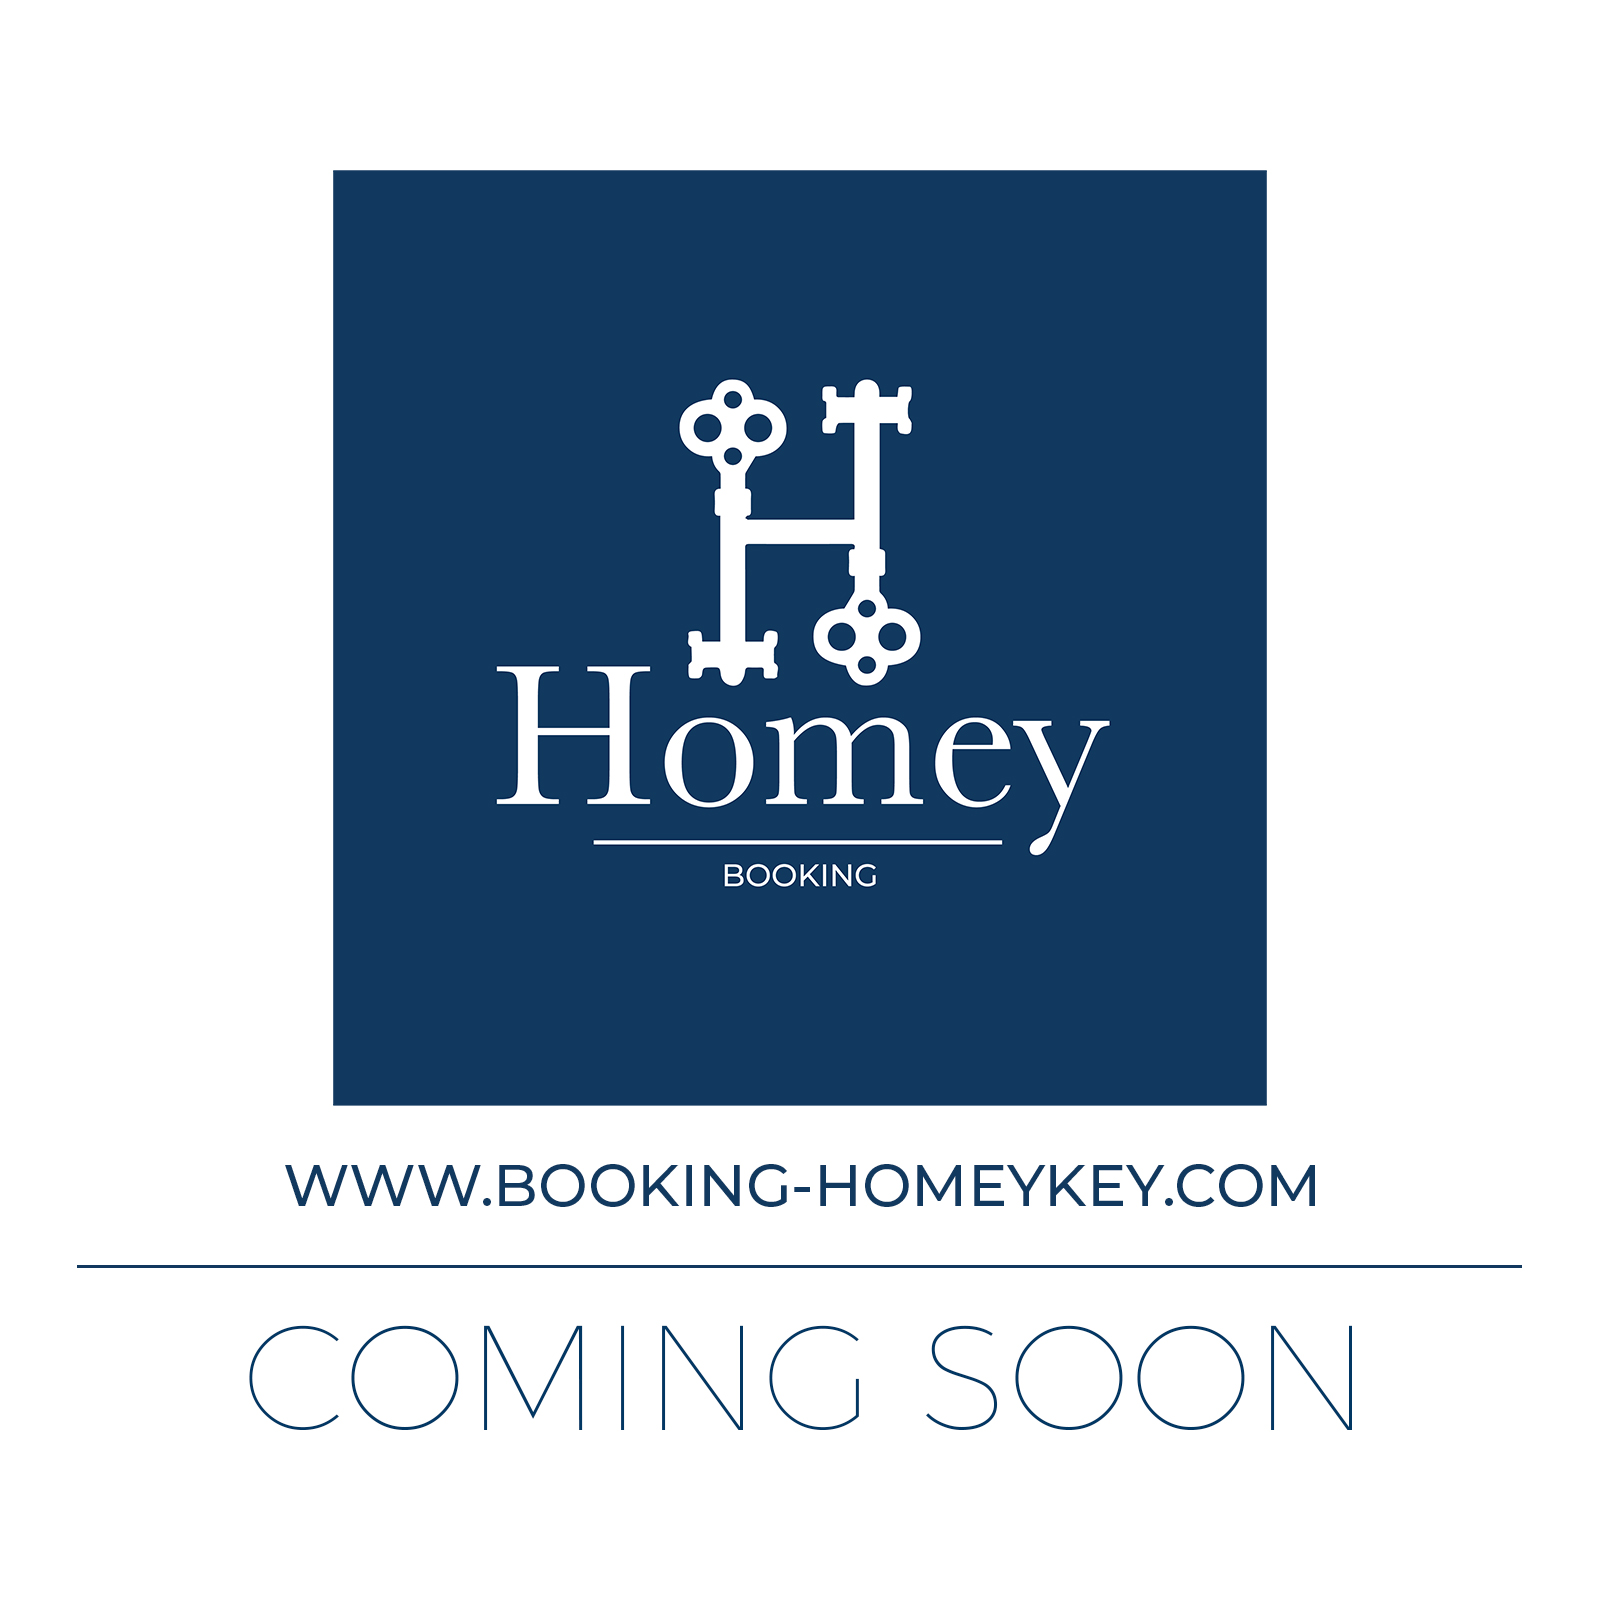 Homey-Booking-coming-soon